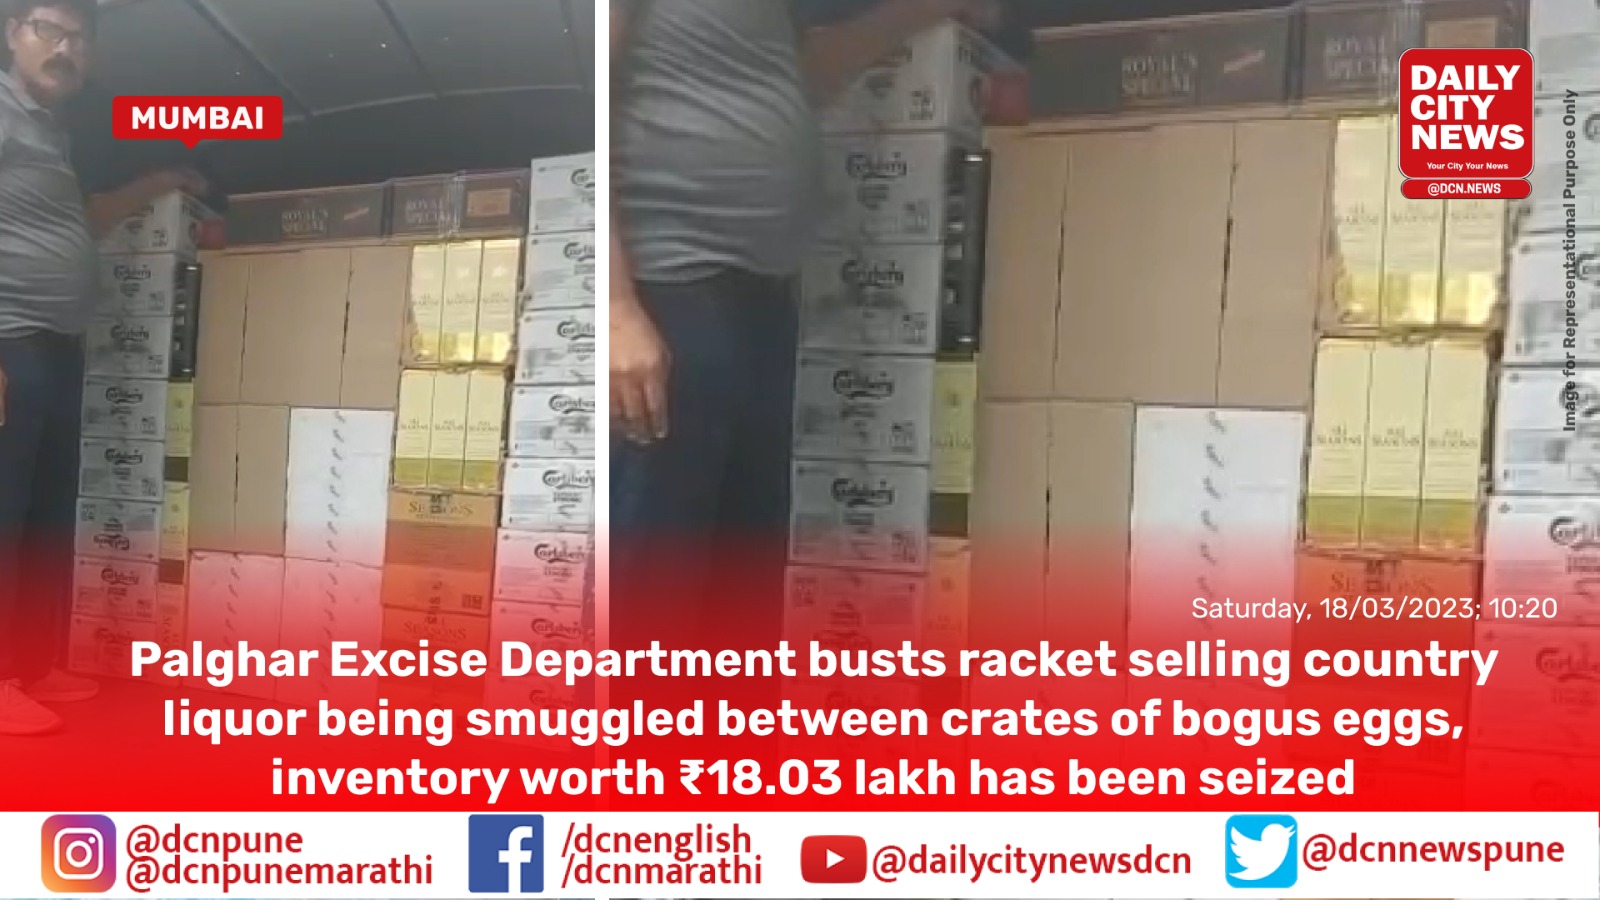 Palghar Excise Department busts racket selling country liquor being smuggled between crates of bogus eggs, inventory worth ₹18.03 lakh has been seized